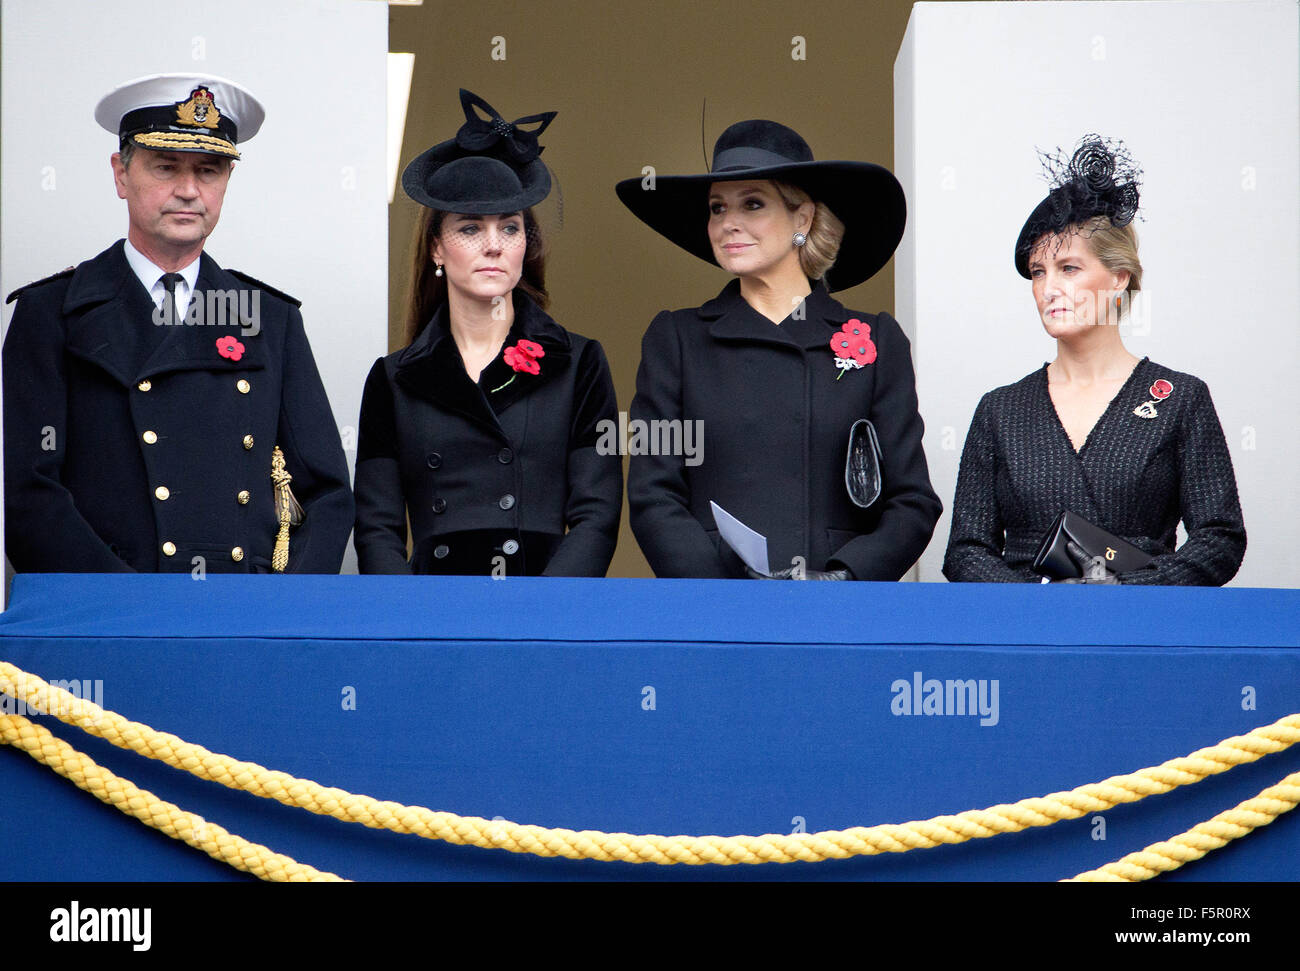 Britain's Catherine the Duchess of Cambridge (2nd L) stands alongside Queen Maxima of the Netherlands (2nd R), Sophie, Duchess of Wessex, and Vice Admiral Sir Timothy Laurence at the Remembrance Sunday ceremony at the Cenotaph in London, Britain, 08 November2015. Britain observed the annual Remembrance Day on 08 November, in memory of the war dead. Photo: Albert Nieboer/RPE/ - NO WIRE SERVICE - Stock Photo